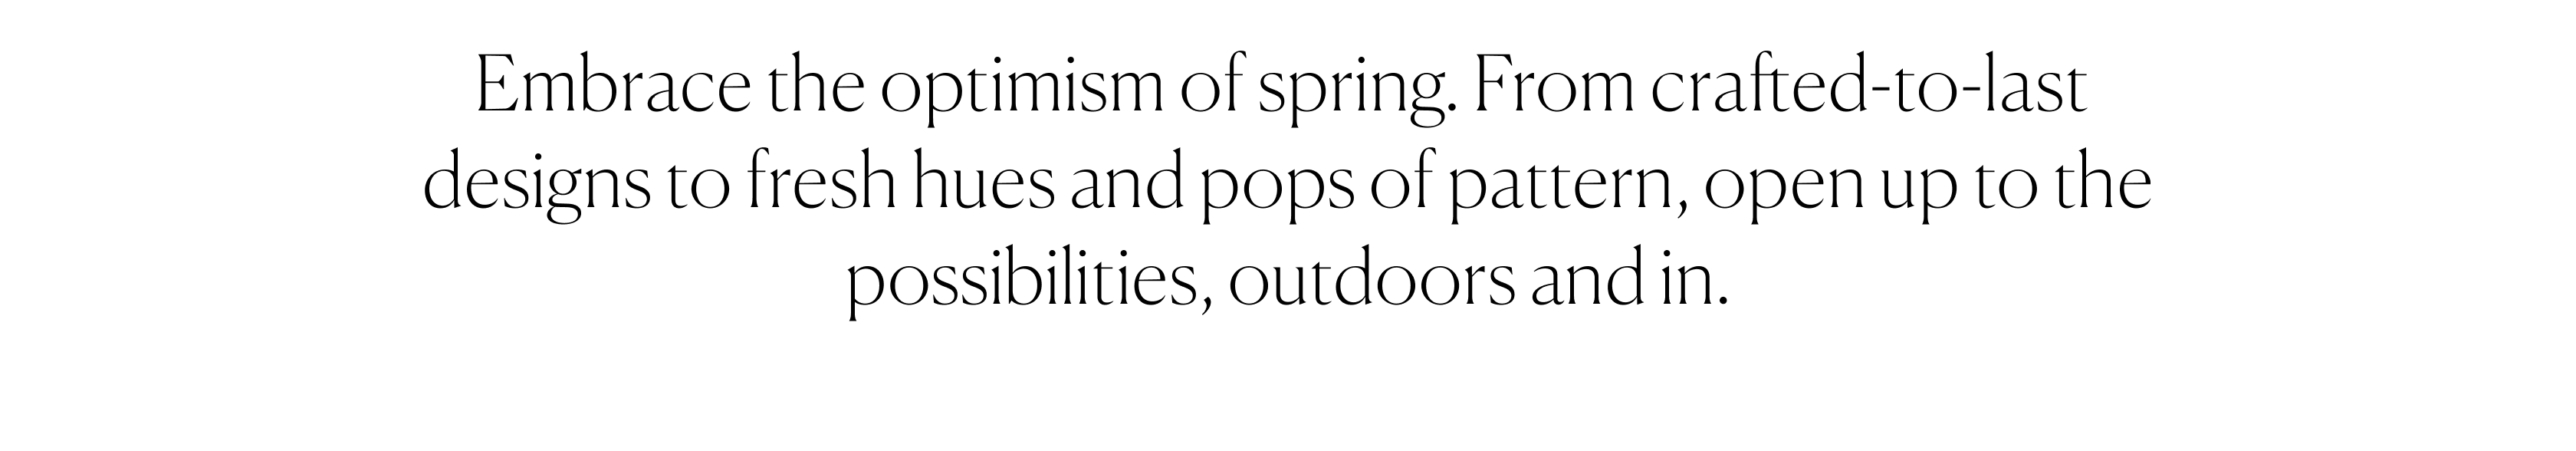 Embrace the optimism of spring.